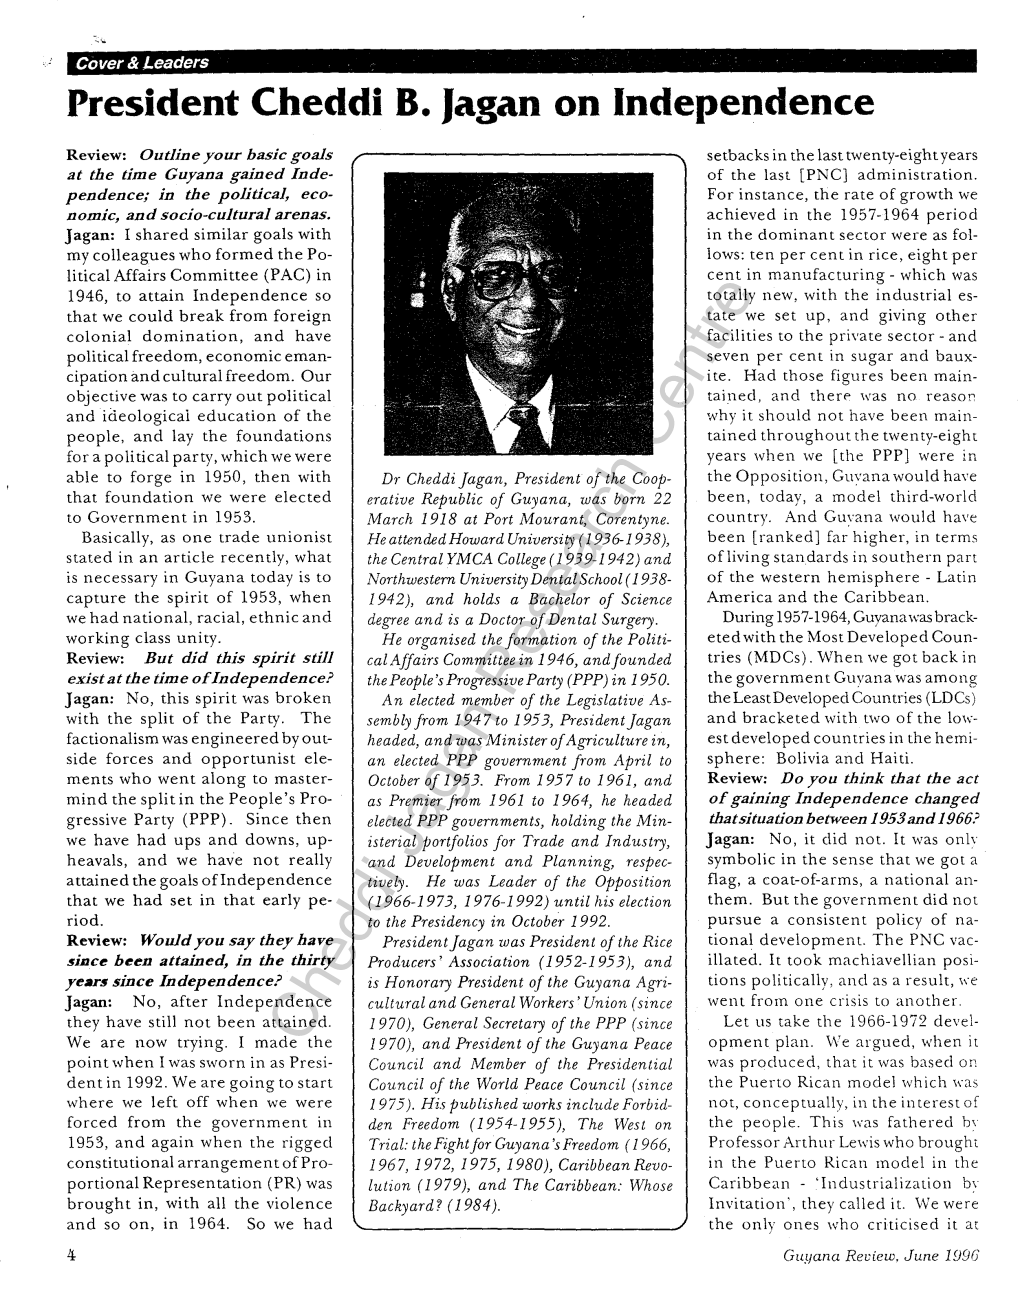 Interview in Guyana Review